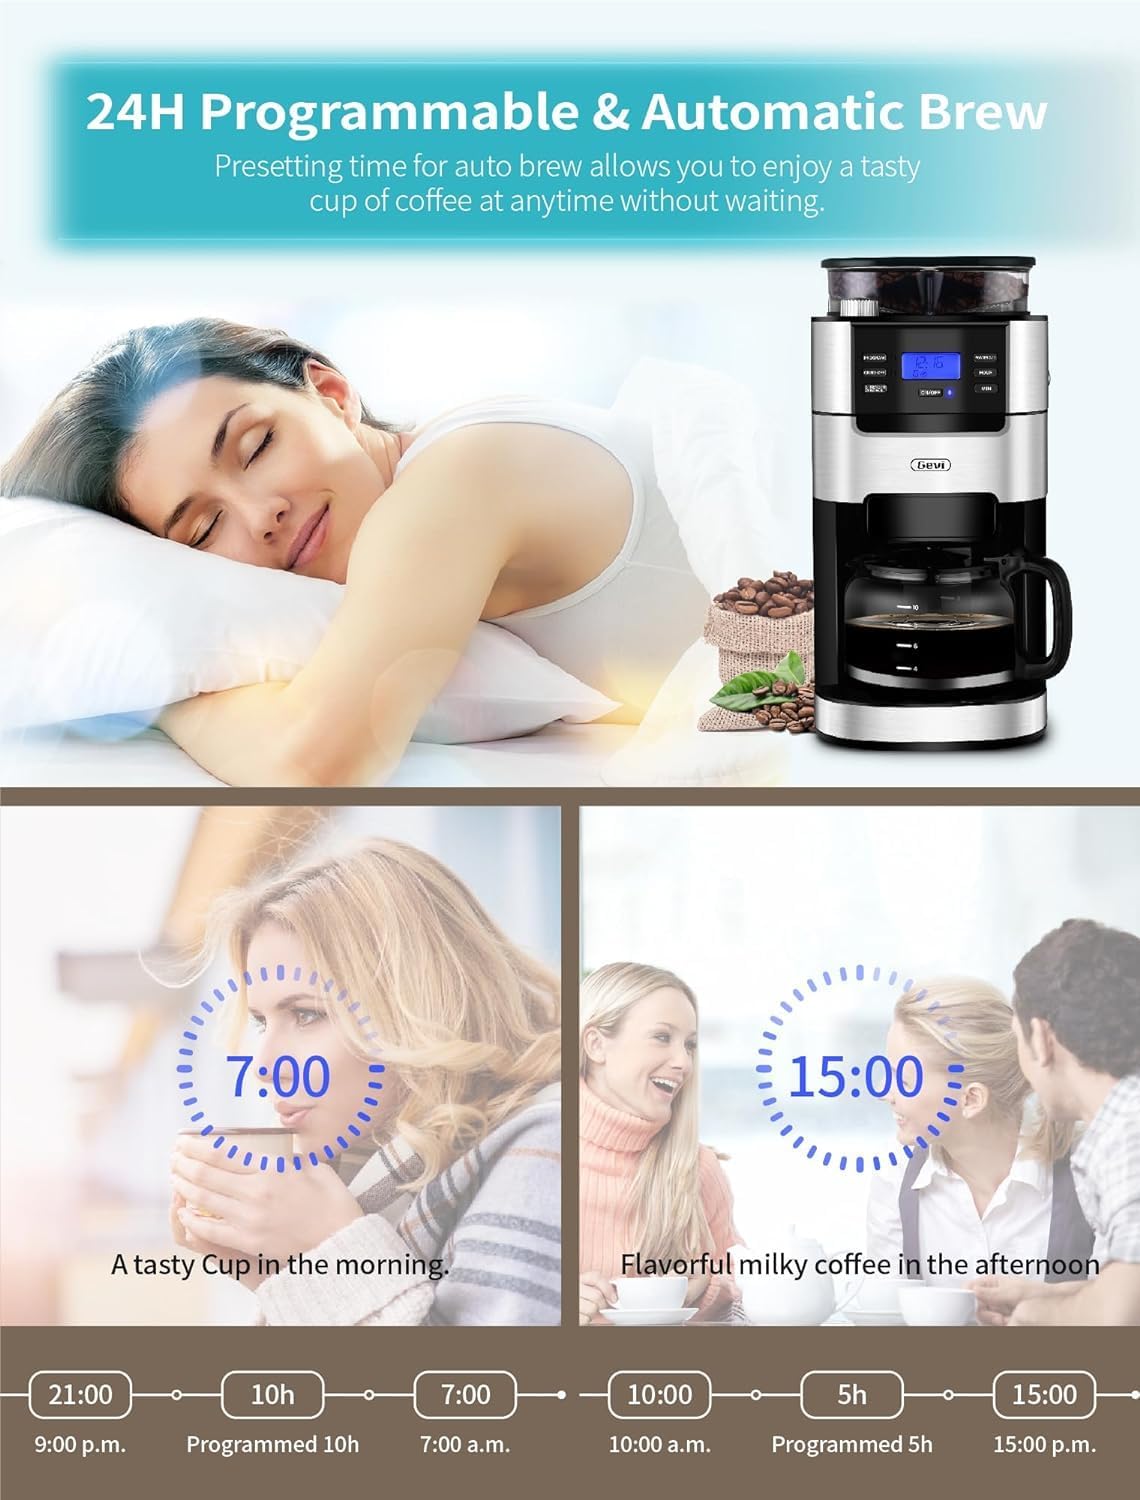 10-Cup Programmable Grind Brew Coffee Maker with Built-In Burr Grinder, Large 1.5L Water Tank, Keep Warm Plate